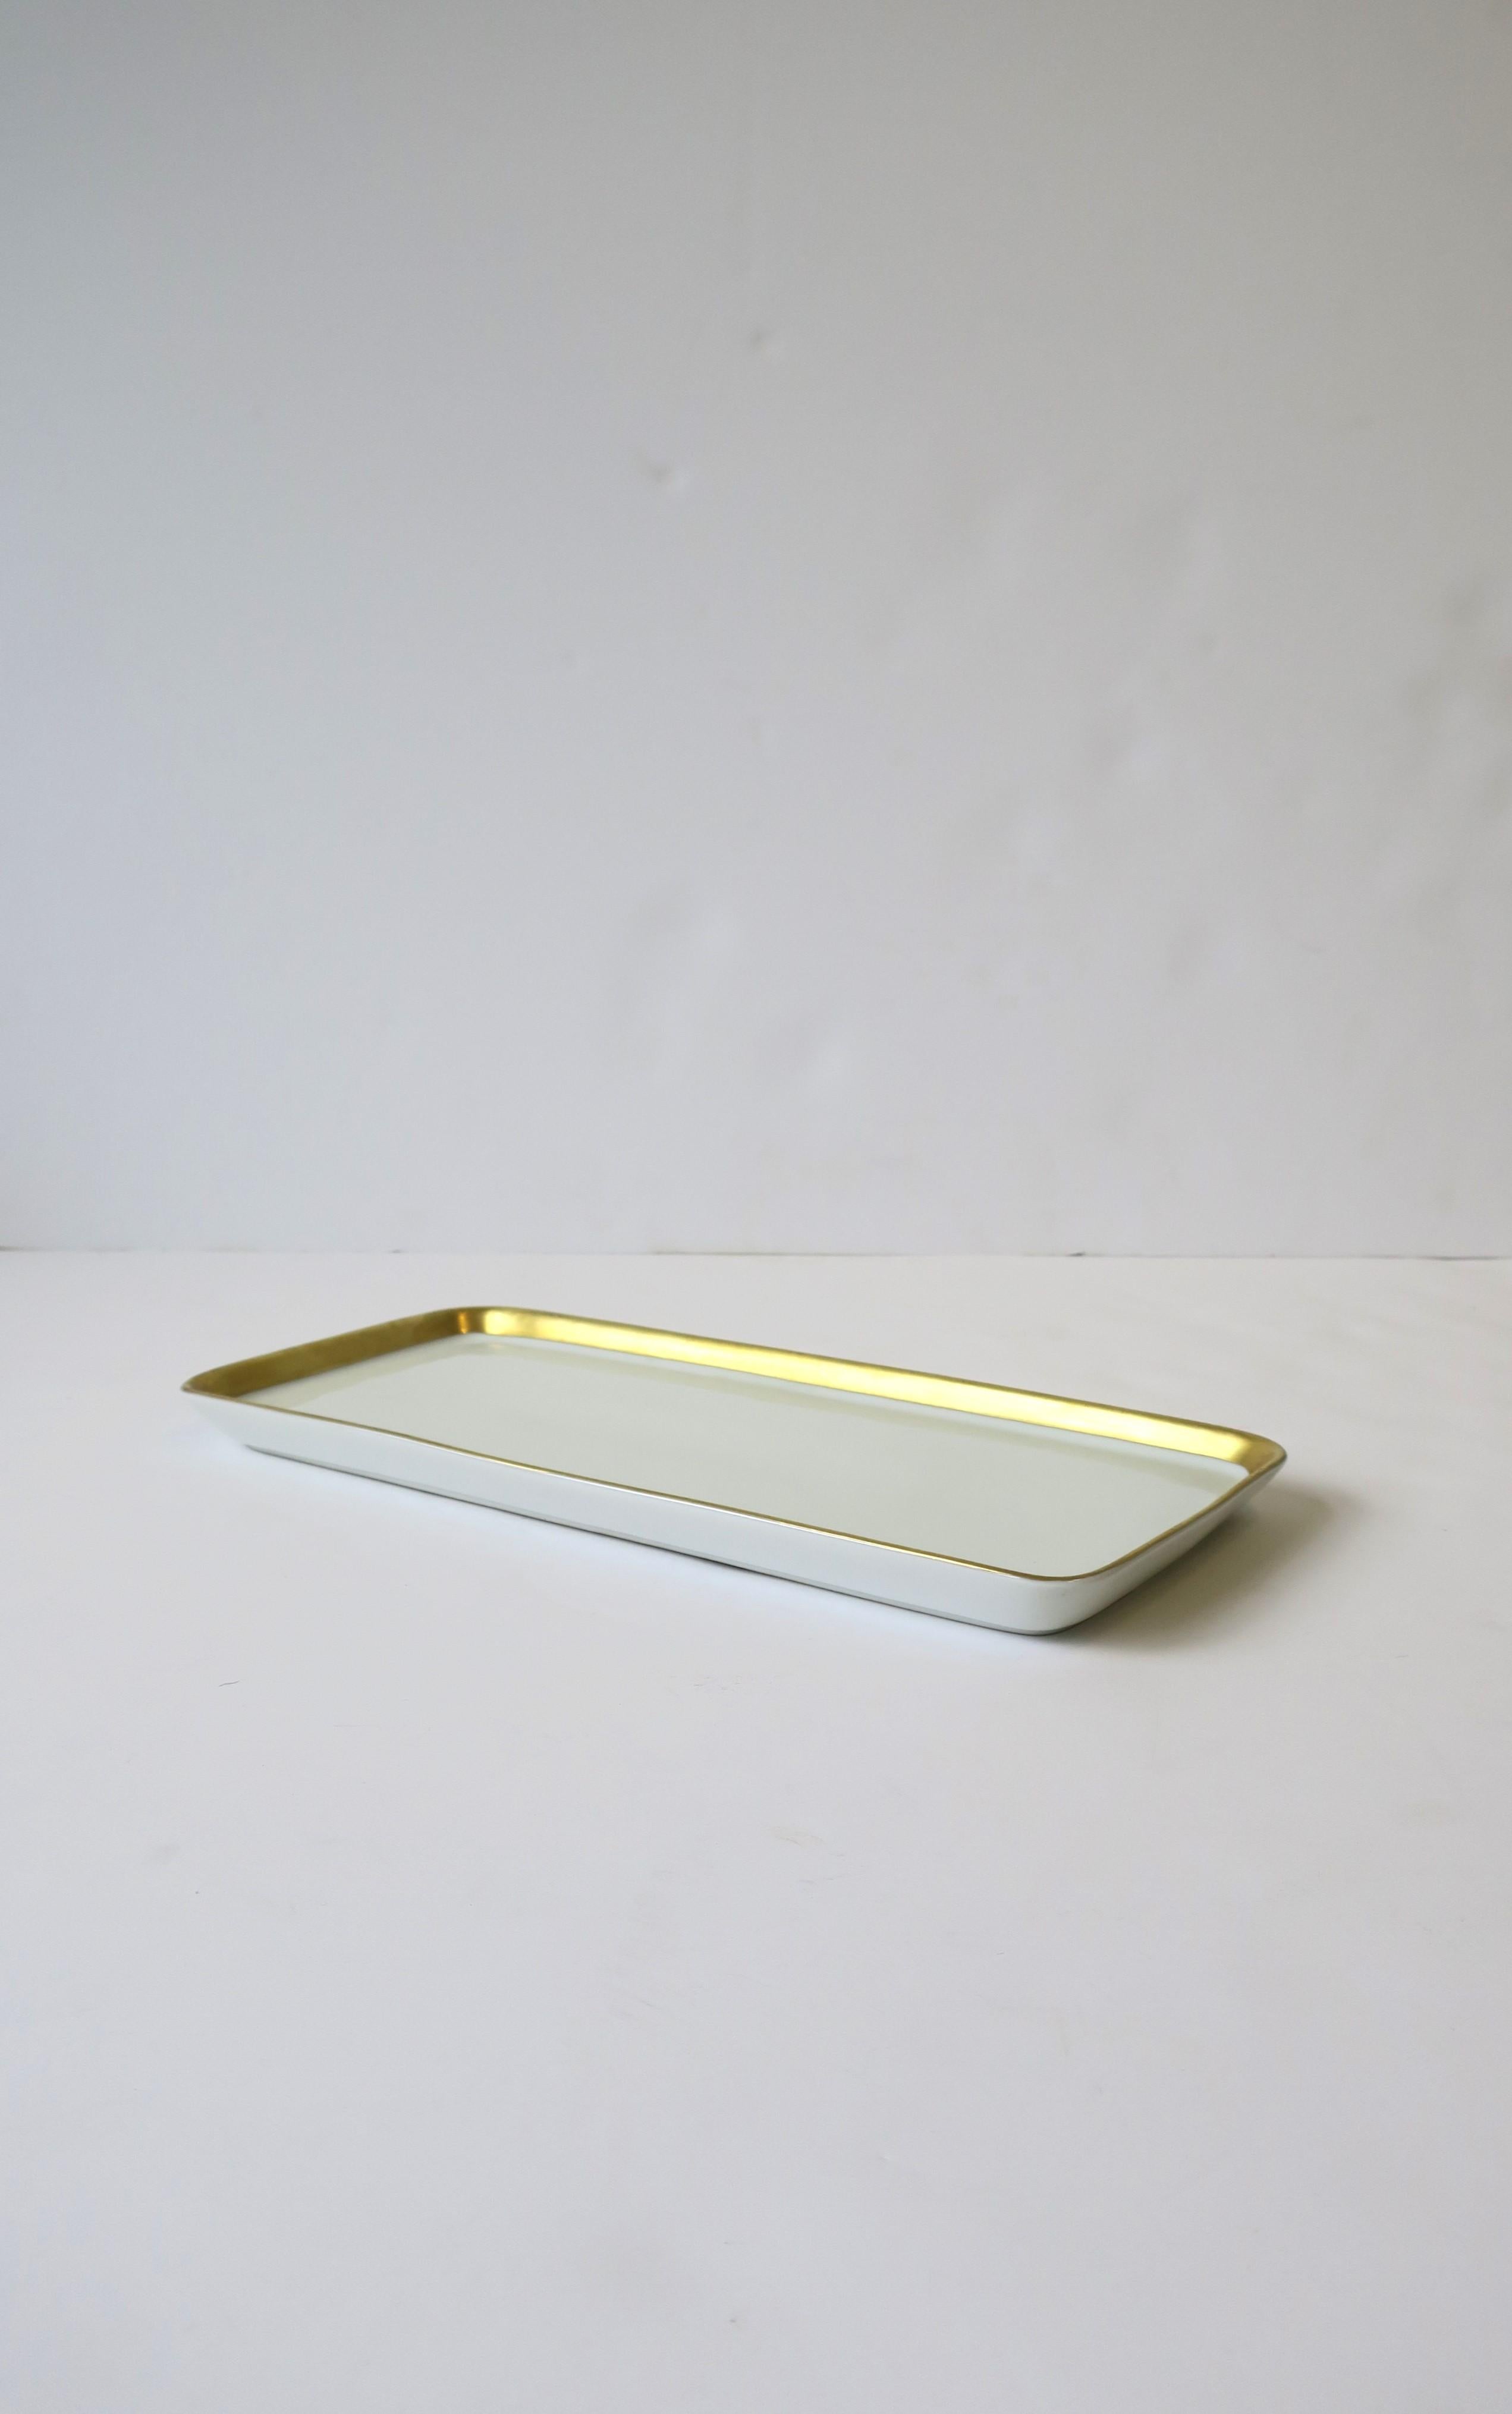 A beautiful German porcelain serving tray in the Kurfurstendamm Berlin pattern, designed by Hans Theo Baumann for Rosenthal, 1959, Germany. Piece is white glazed porcelain with gold band around edge, rectangular in shape. Piece was design as a